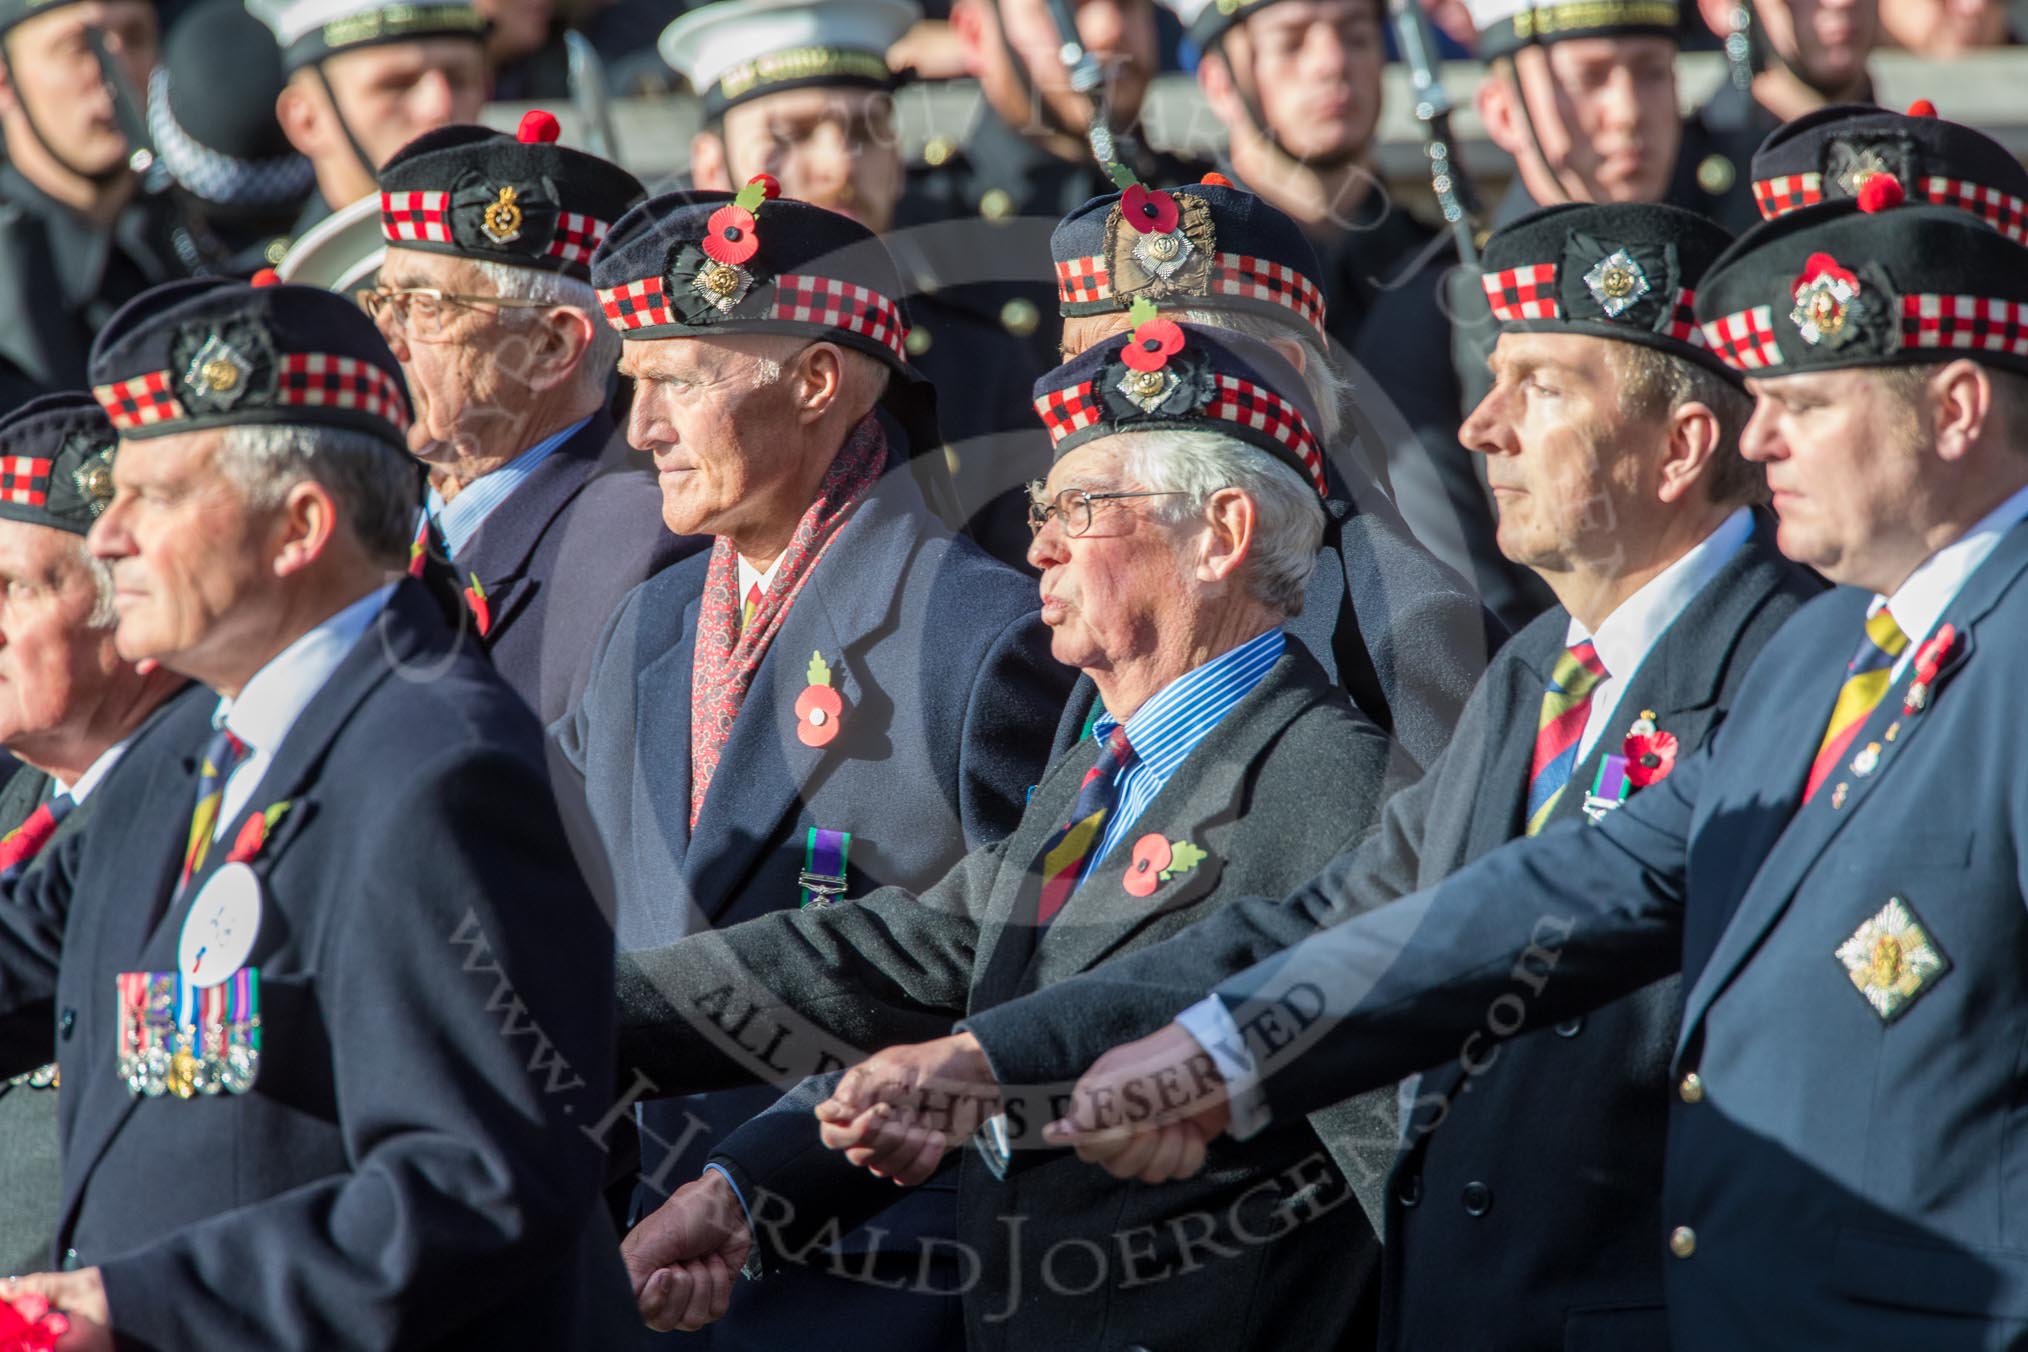 The Royal Scots Regimental Association (Group A8, 25 members) during the Royal British Legion March Past on Remembrance Sunday at the Cenotaph, Whitehall, Westminster, London, 11 November 2018, 11:56.